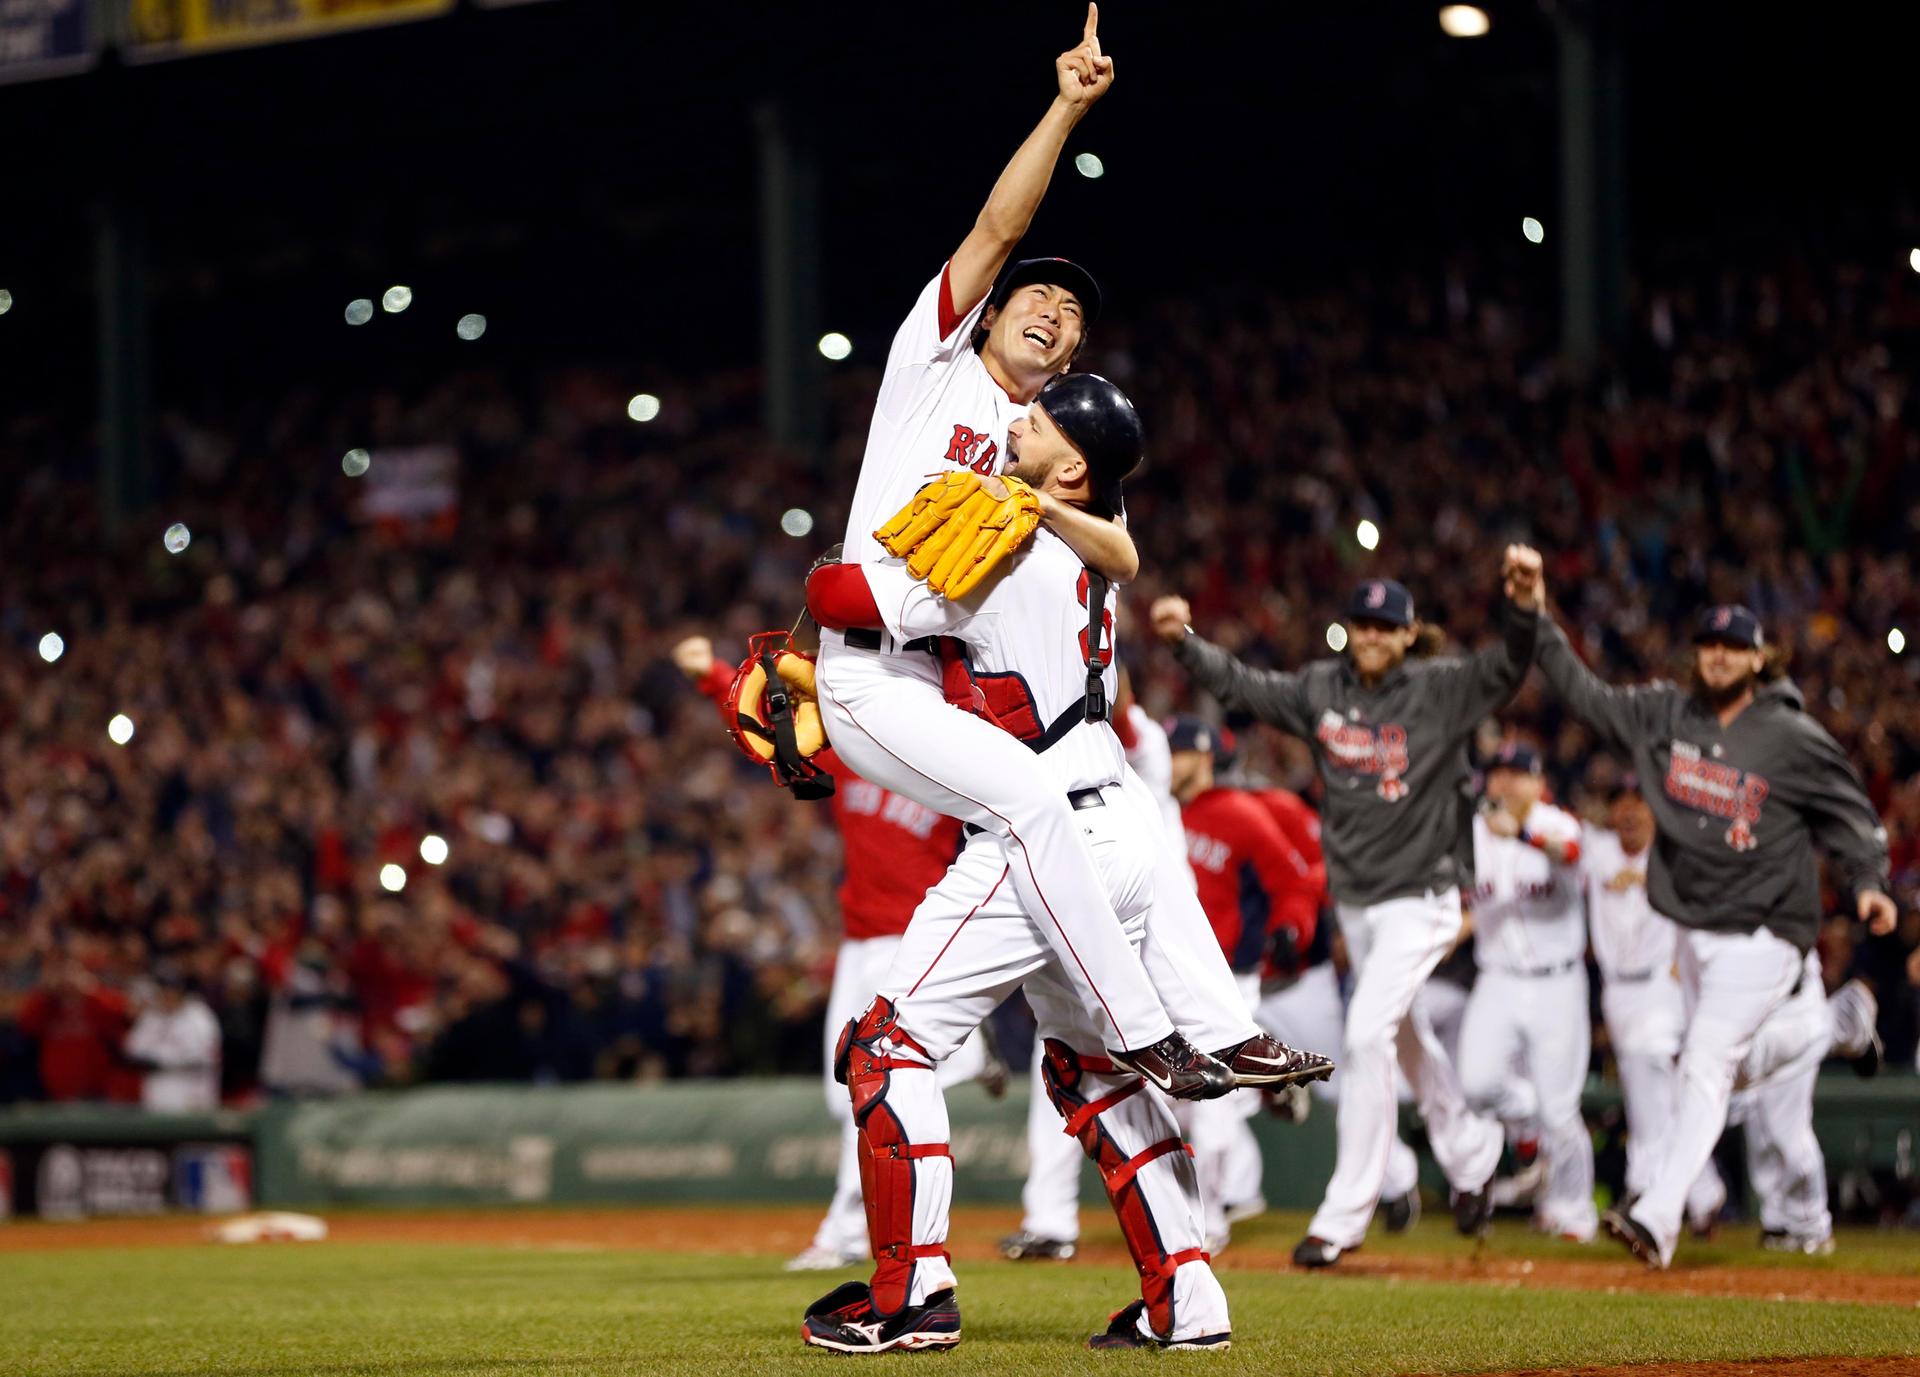 Red Sox win 2013 World Series